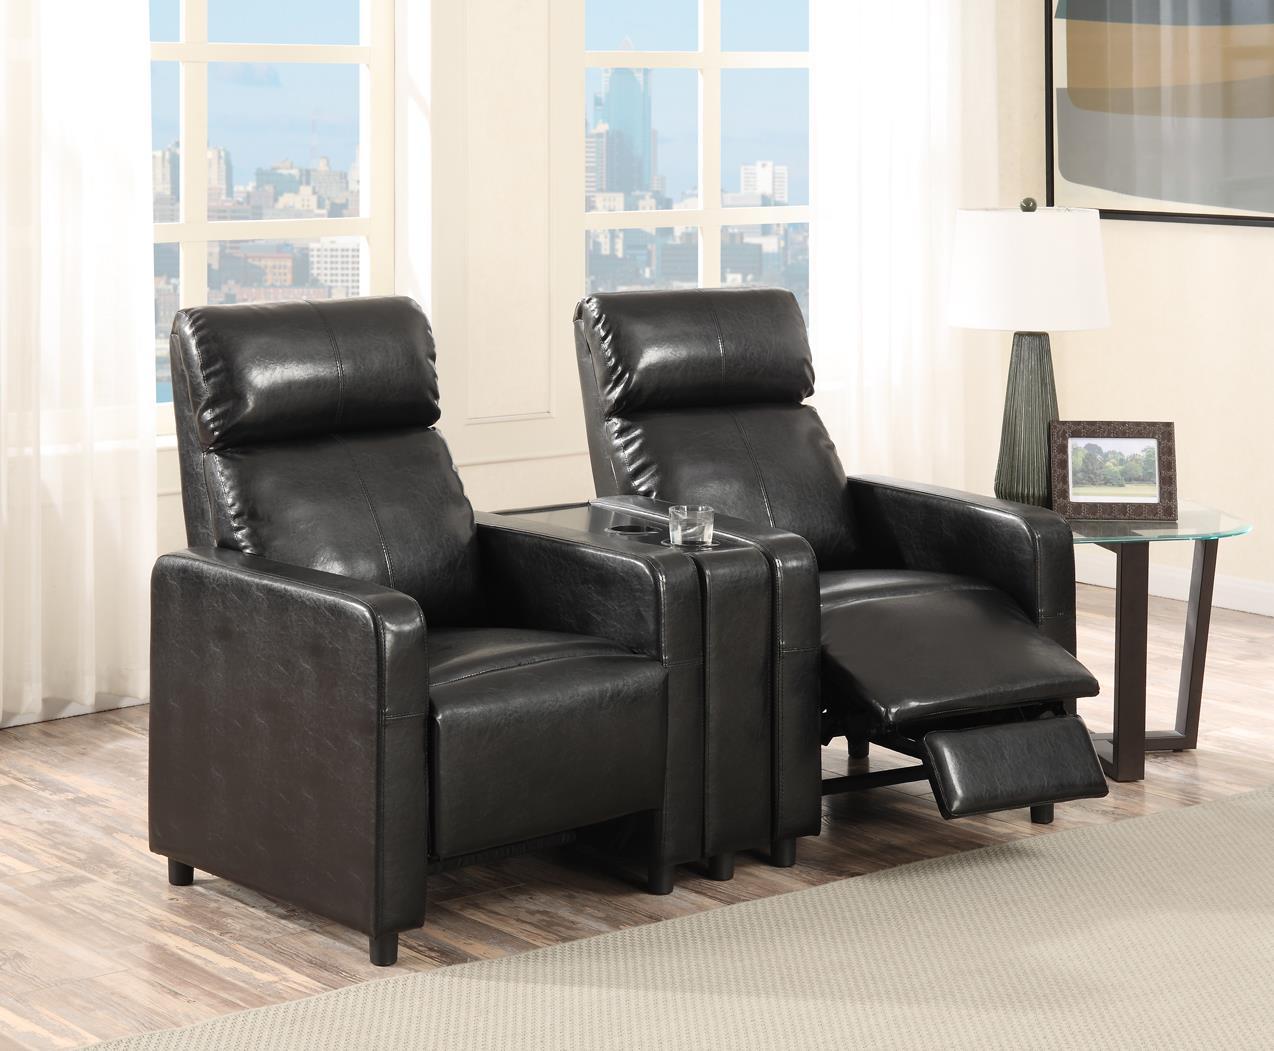 

    
MYCO Furniture Arcadia Black Bonded Leather Reclining Home Theater 2 Seats w/Cupholders
